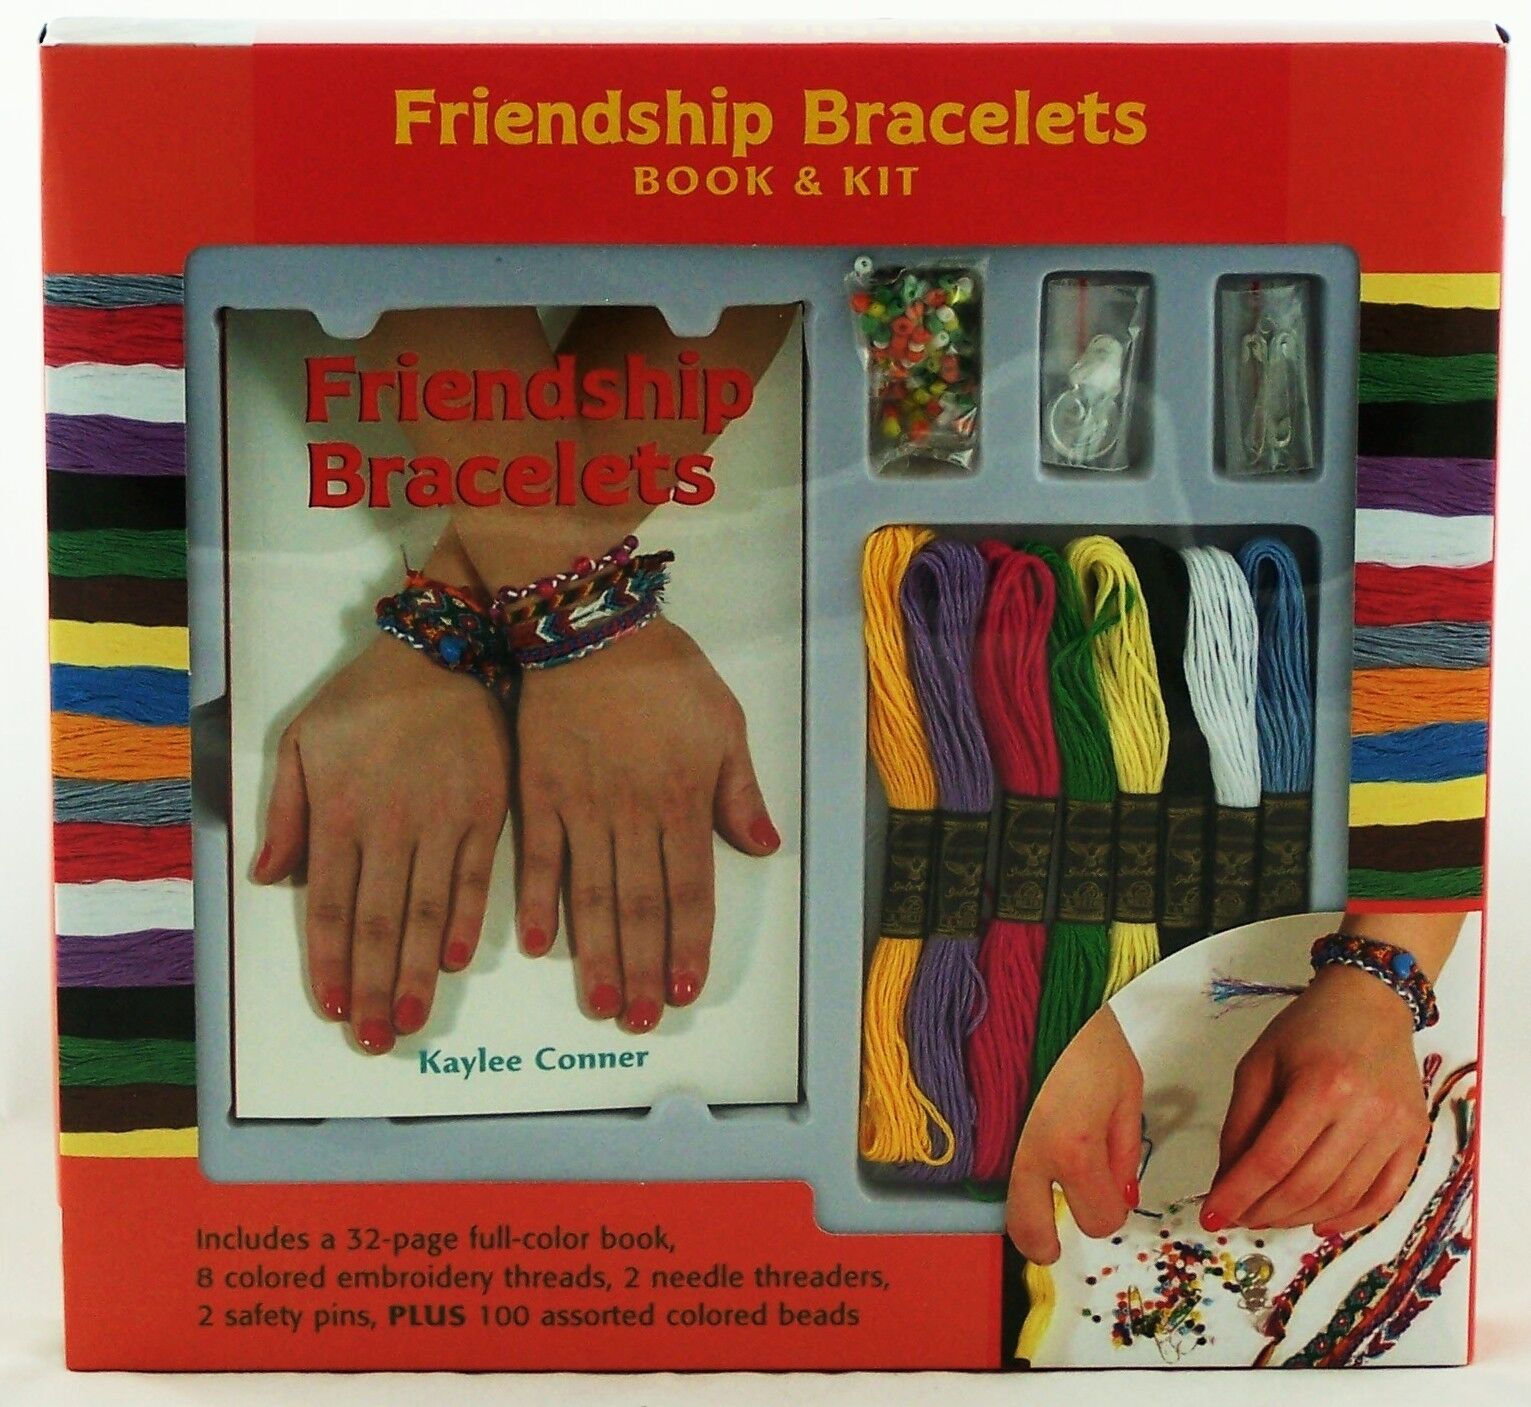 Friendship Bracelet Craft Activity Kit and Book Set NEW sleepover bff gift party